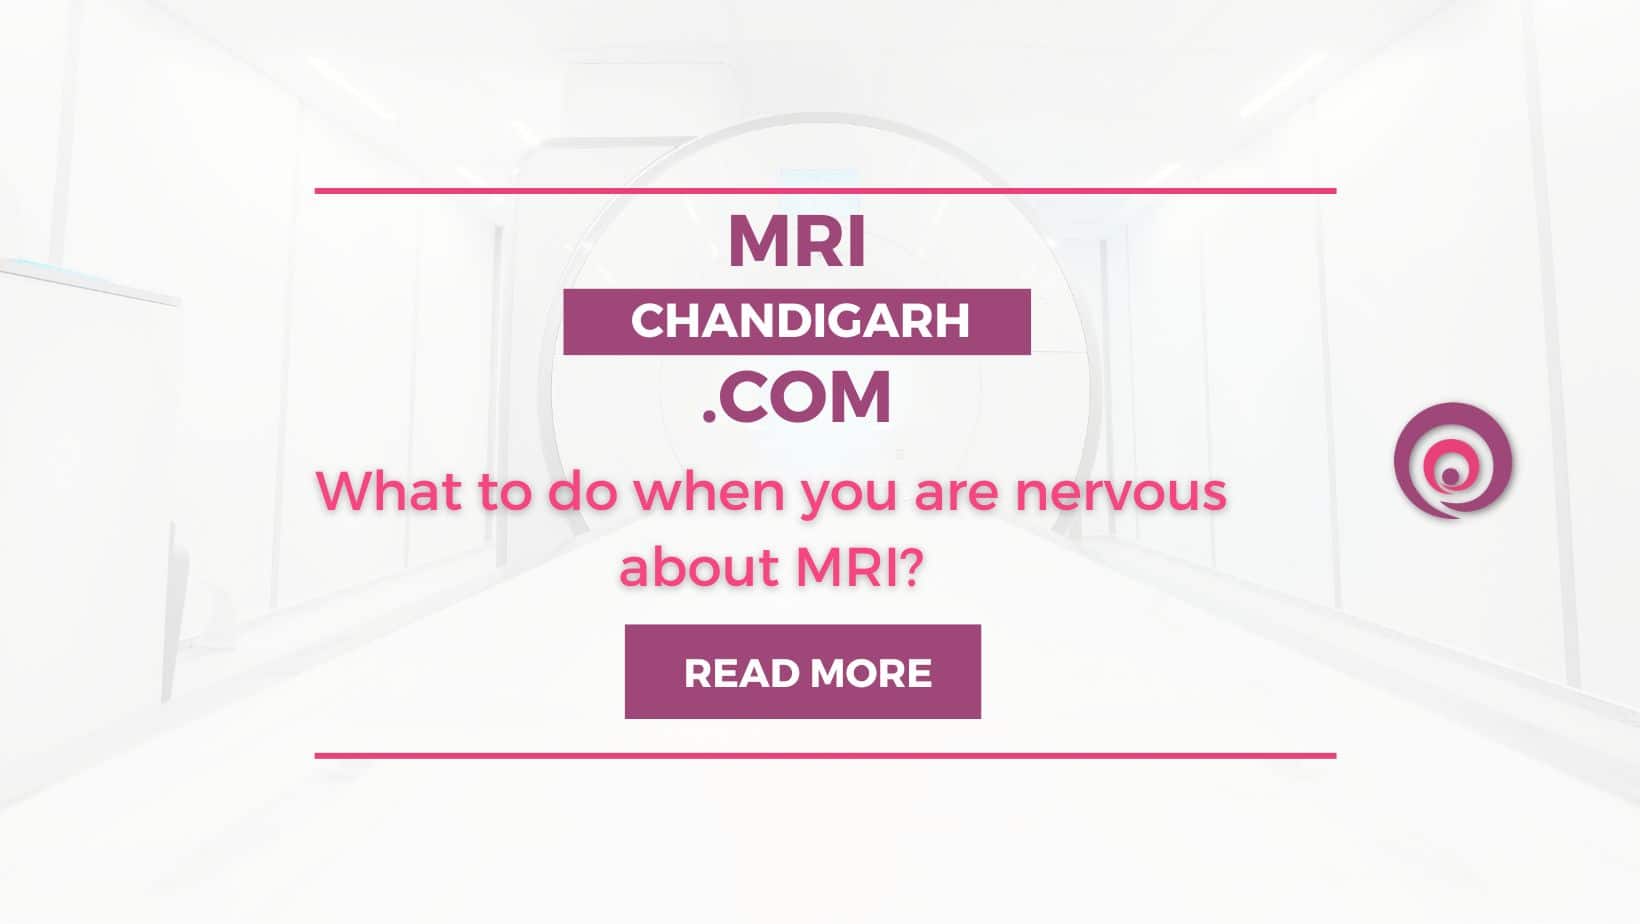 What to do when you are nervous about MRI?